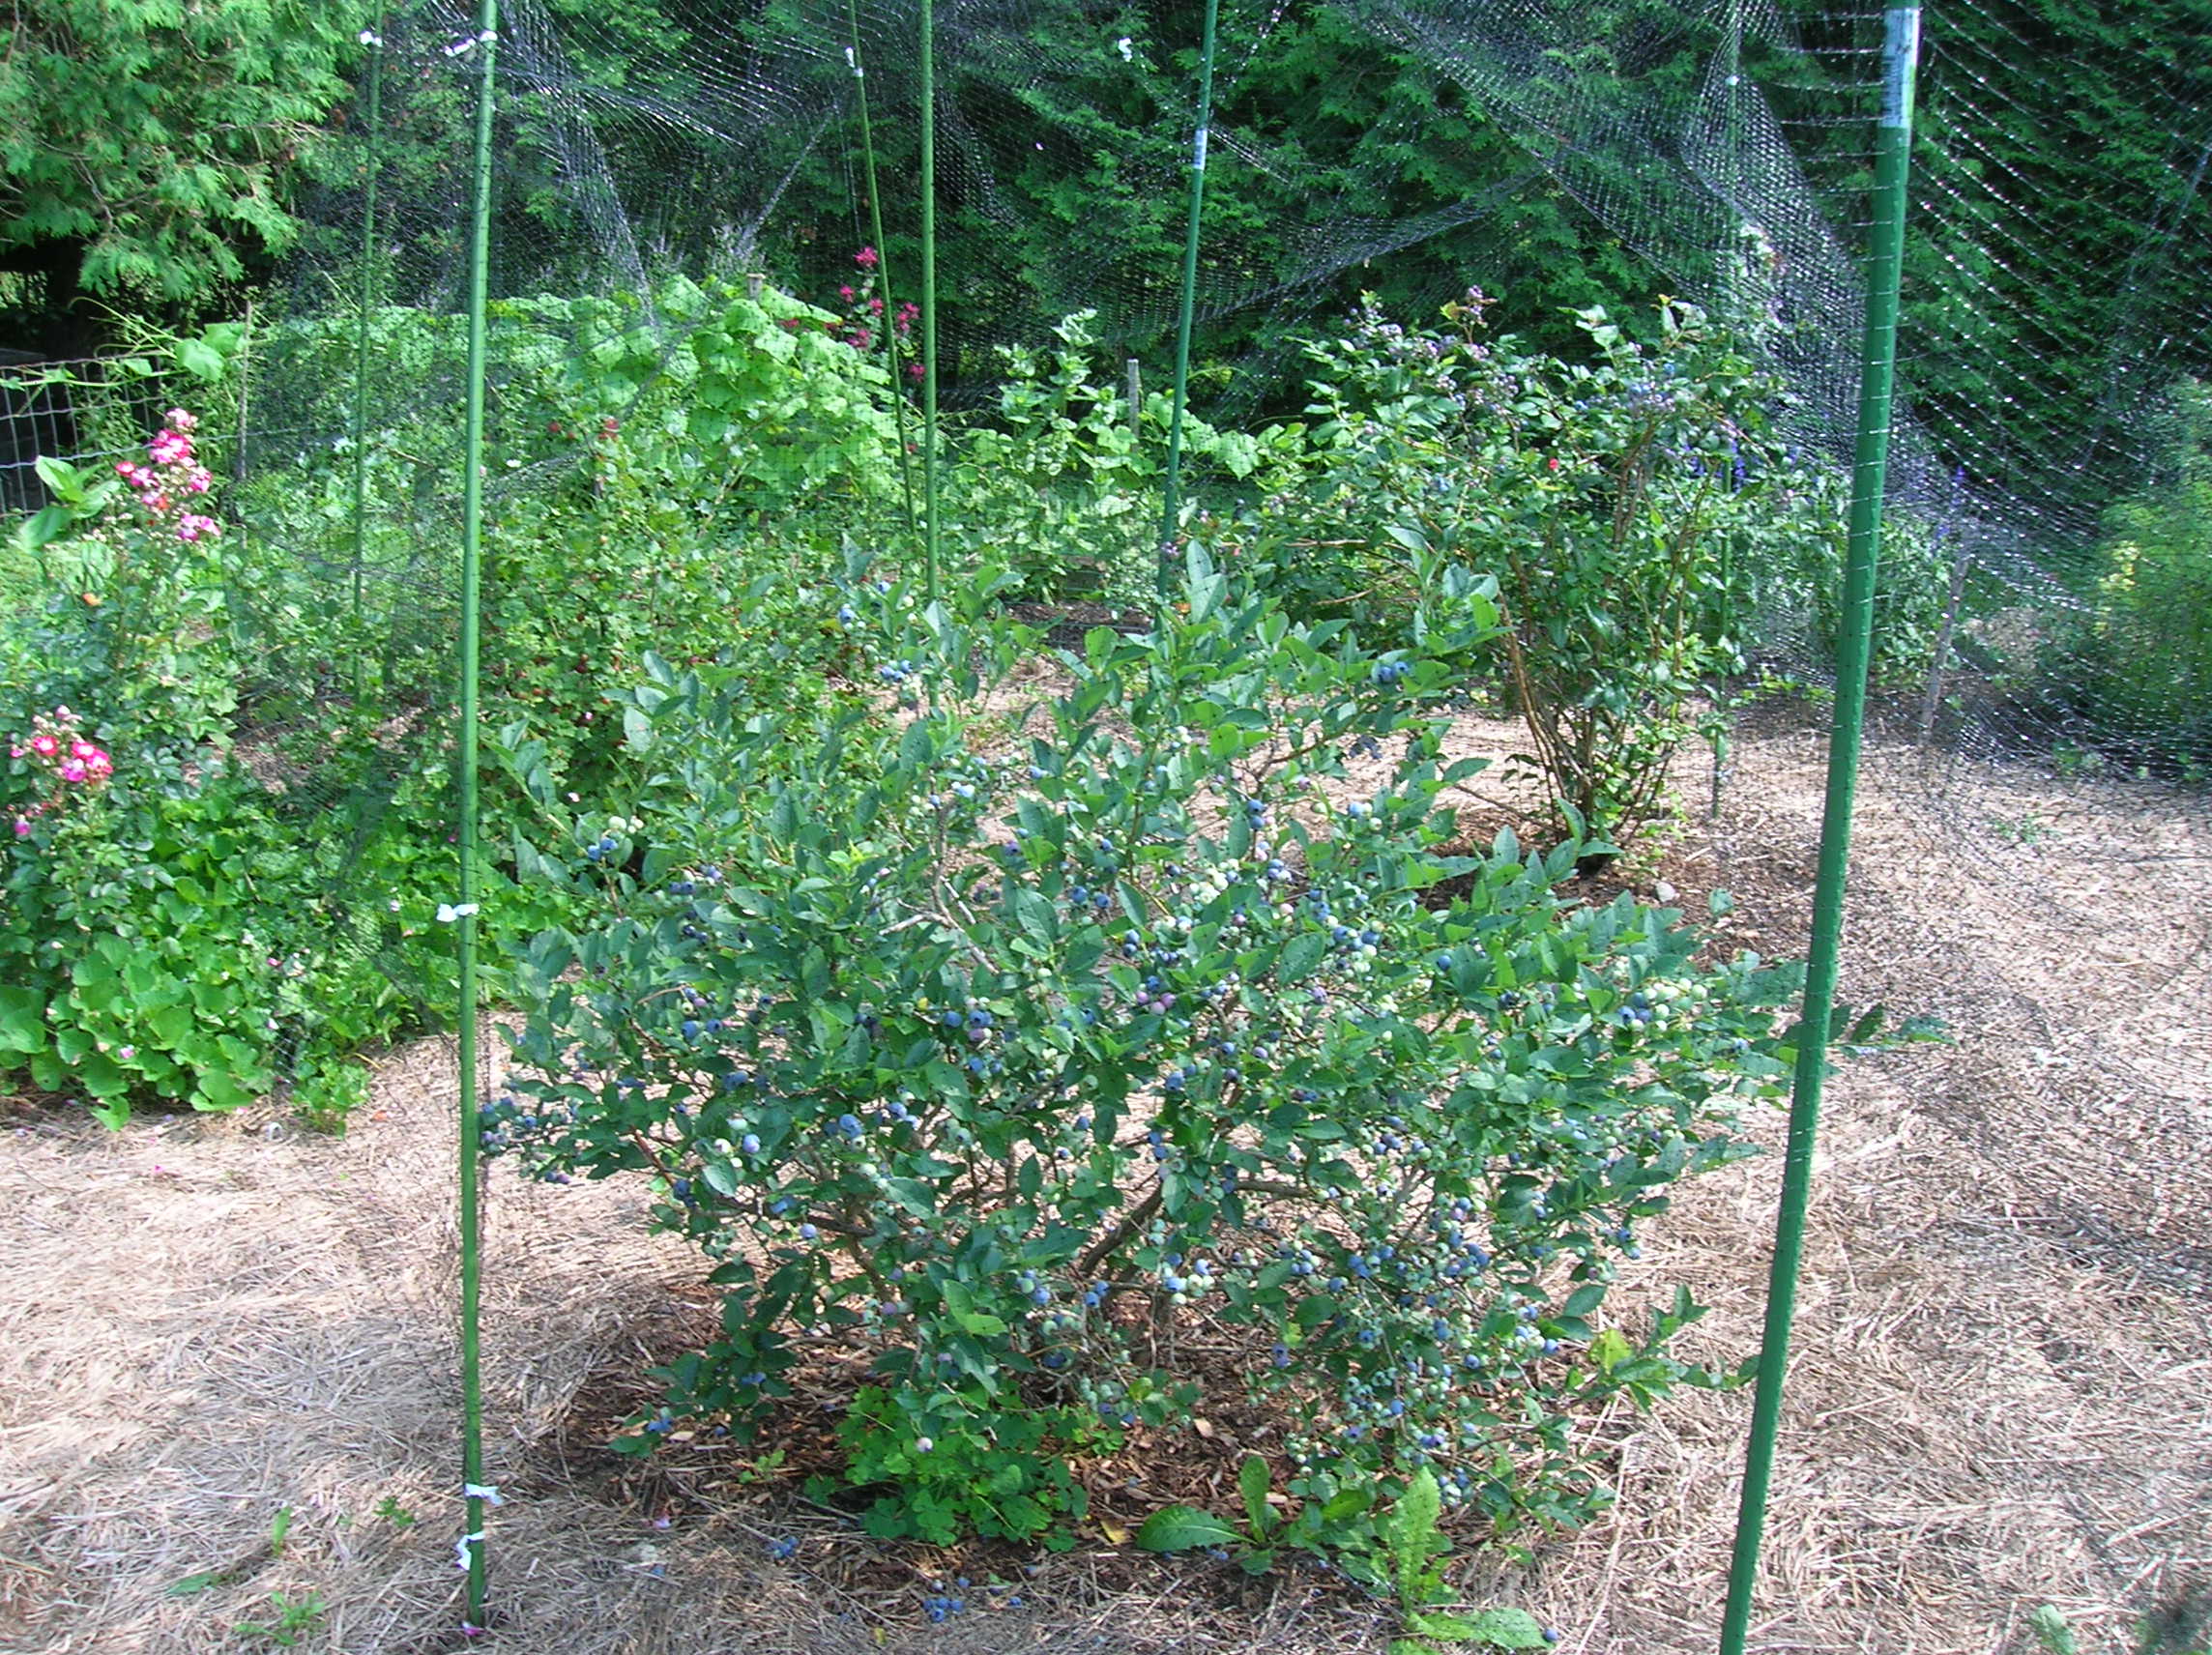 What is a good way to plant blueberry bushes?